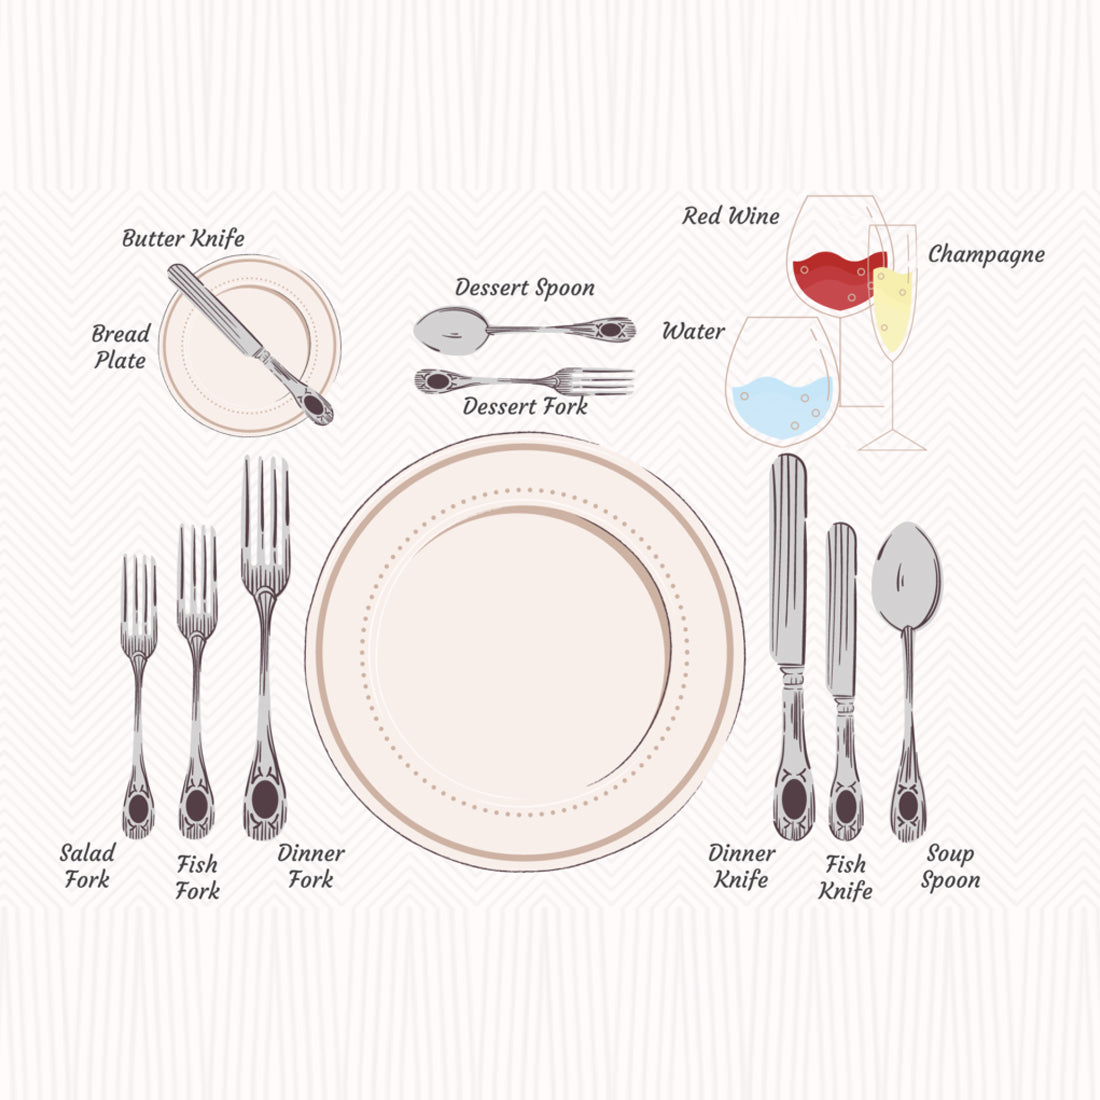 THE LANGUAGE OF CUTLERY, AN ULTIMATE DINING ETIQUETTE GUIDE!